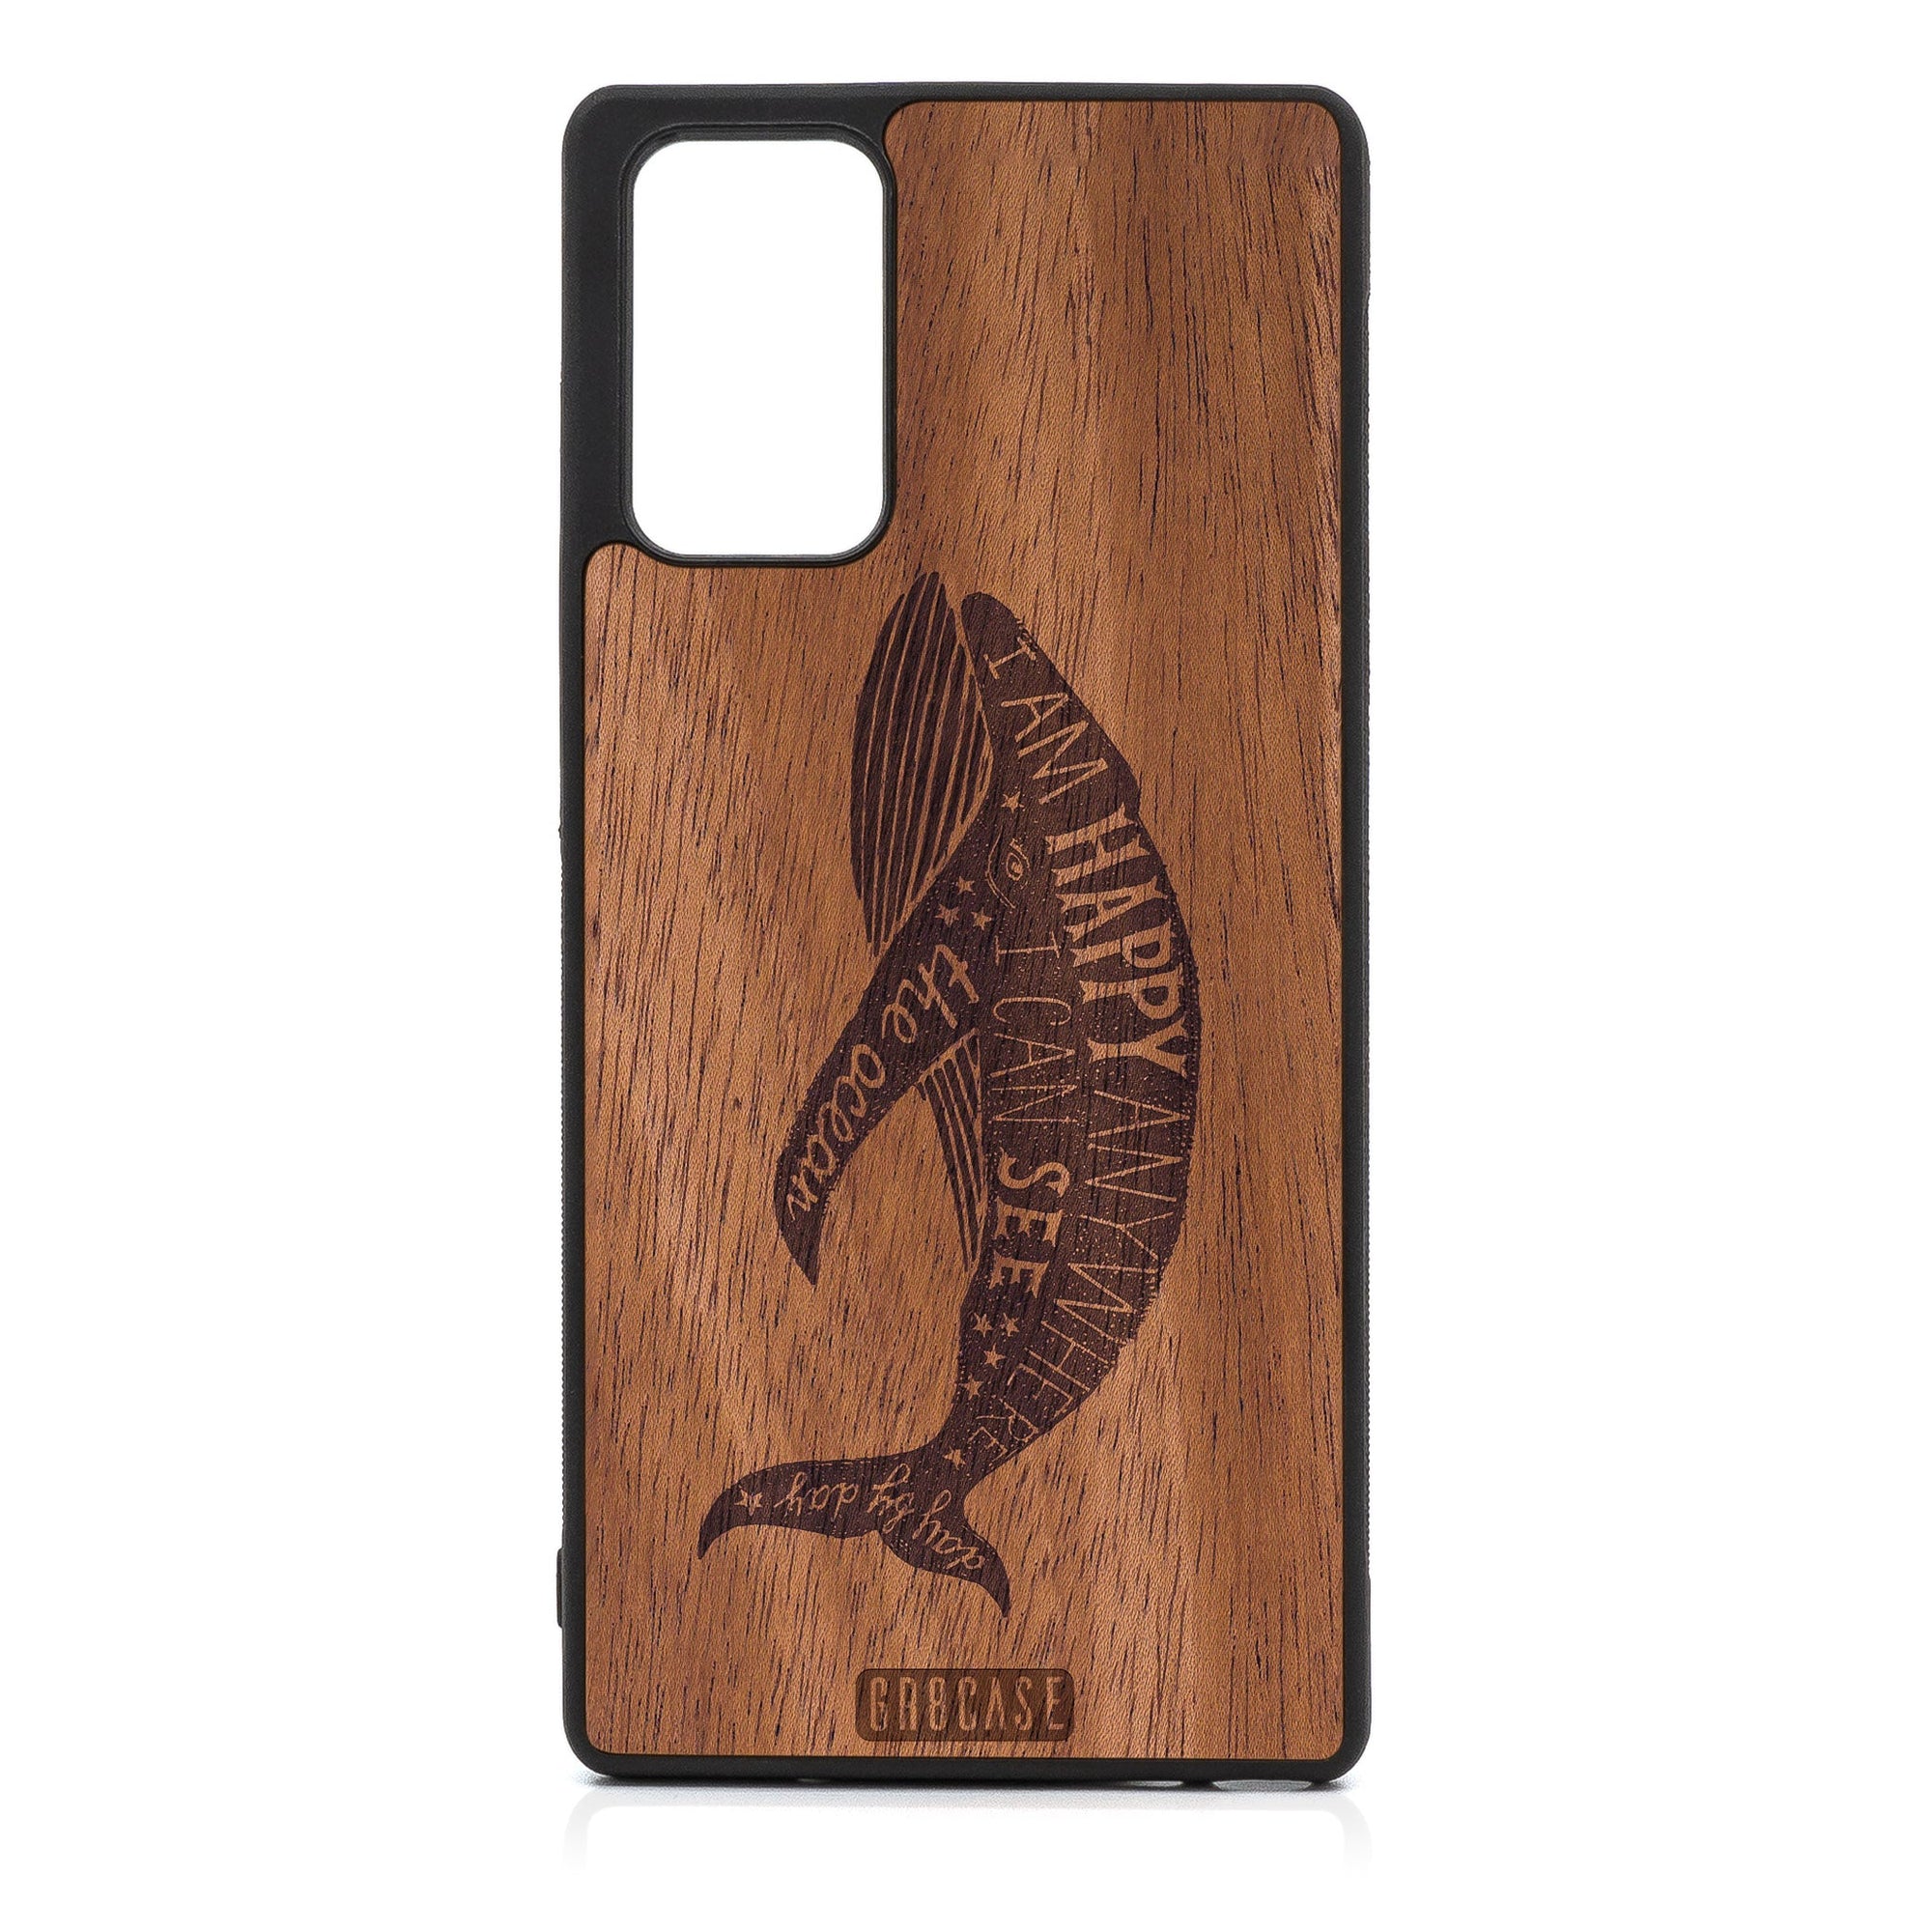 I'm Happy Anywhere I Can See The Ocean (Whale) Design Wood Case For Samsung Galaxy A52 5G